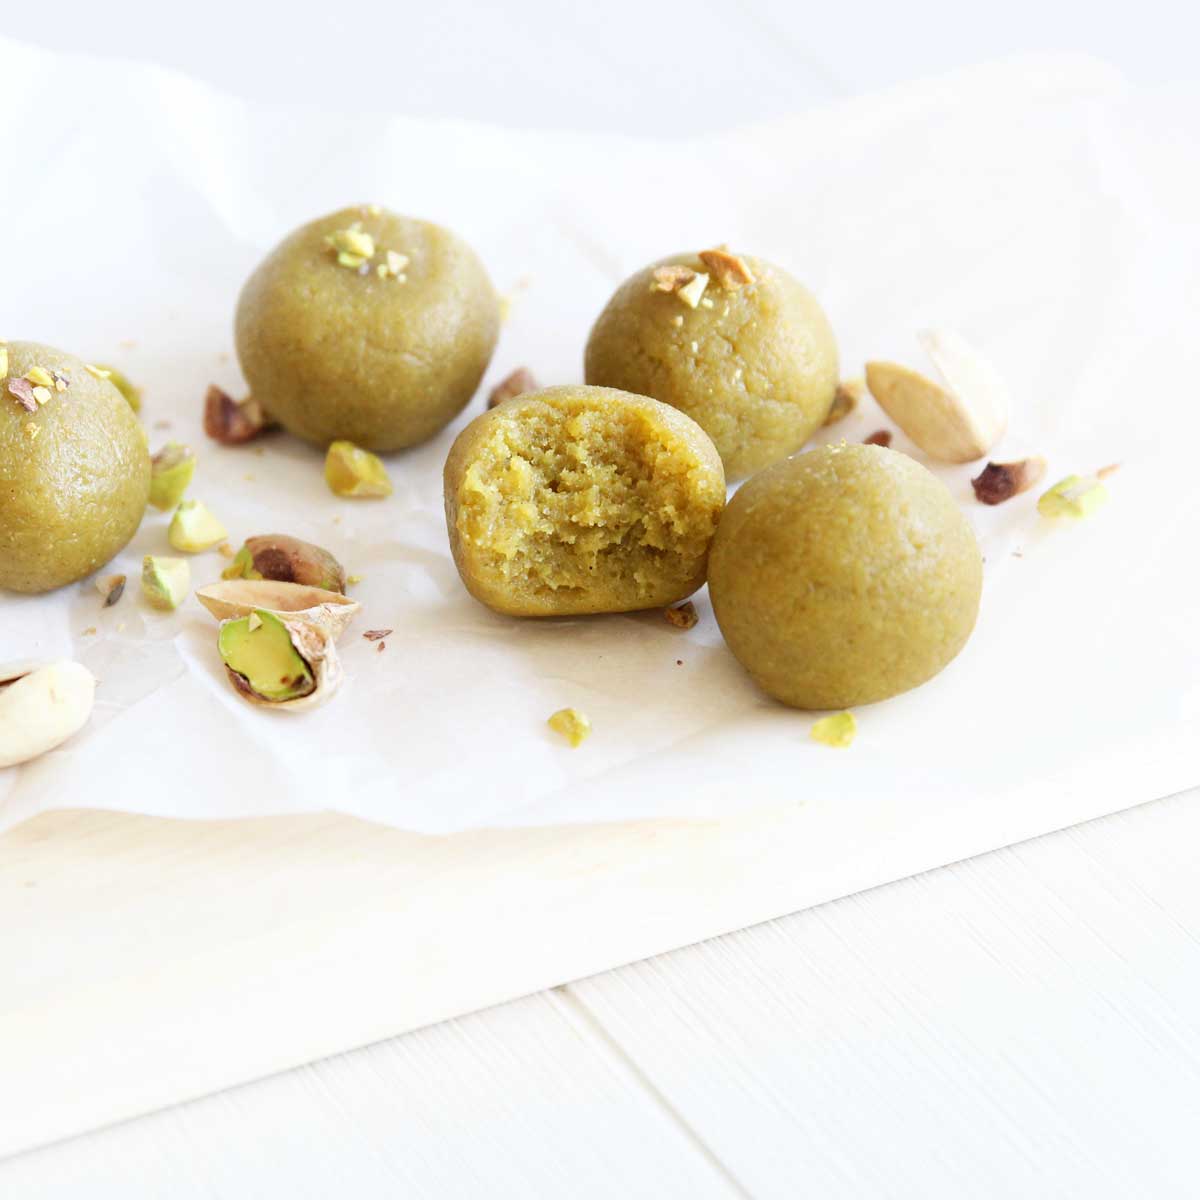 Keto Pistachio Cheesecake Protein Balls (Low Carb Energy Bites made with Collagen Peptides) - Zucchini Flatbread